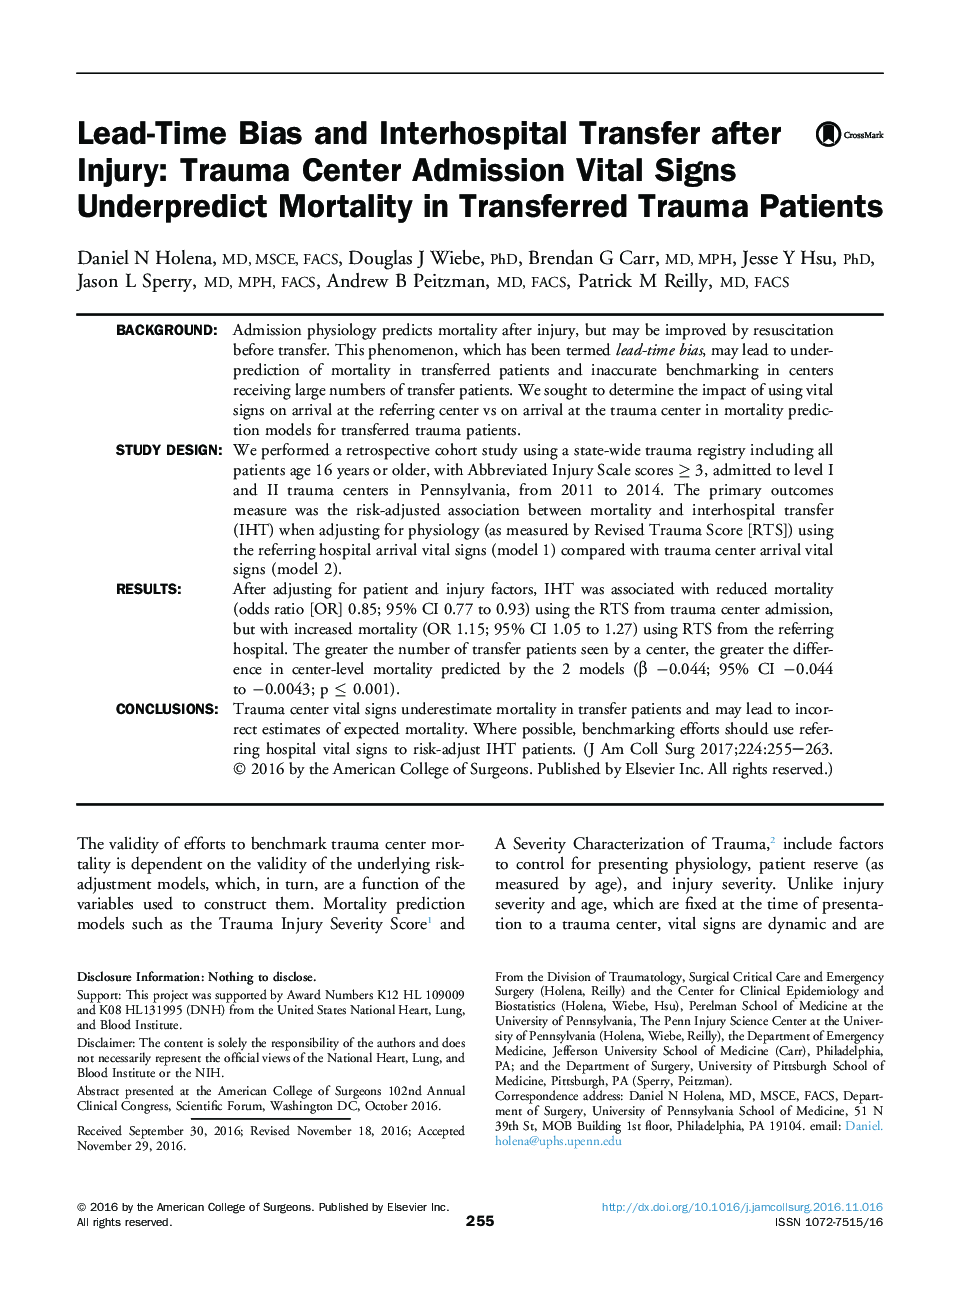 Original scientific articleLead-Time Bias and Interhospital Transfer after Injury: Trauma Center Admission Vital Signs Underpredict Mortality in Transferred Trauma Patients